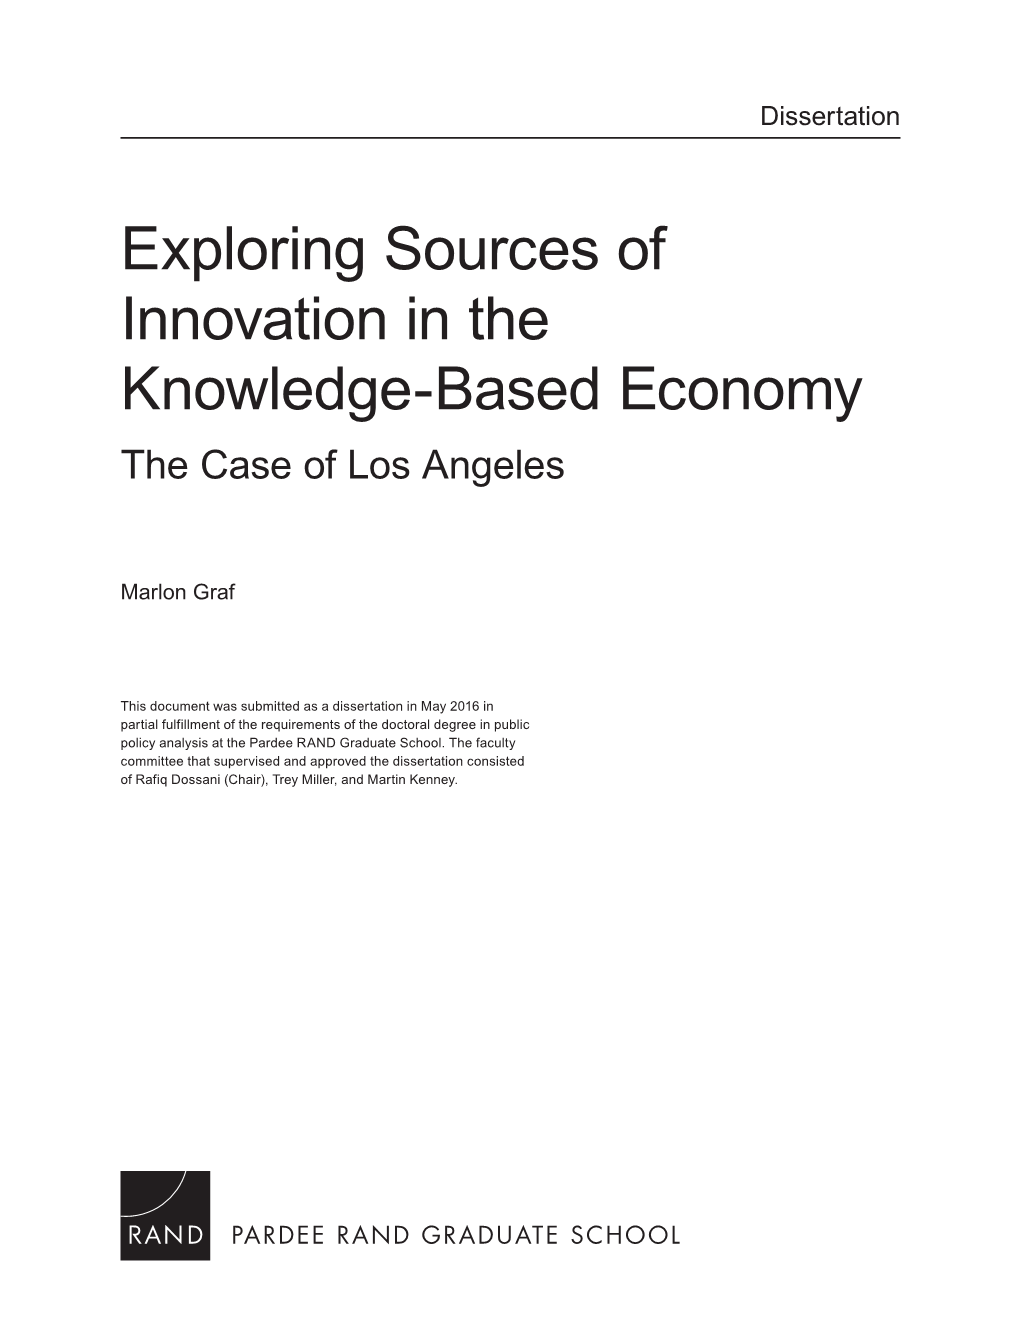 Exploring Sources of Innovation in the Knowledge-Based Economy the Case of Los Angeles